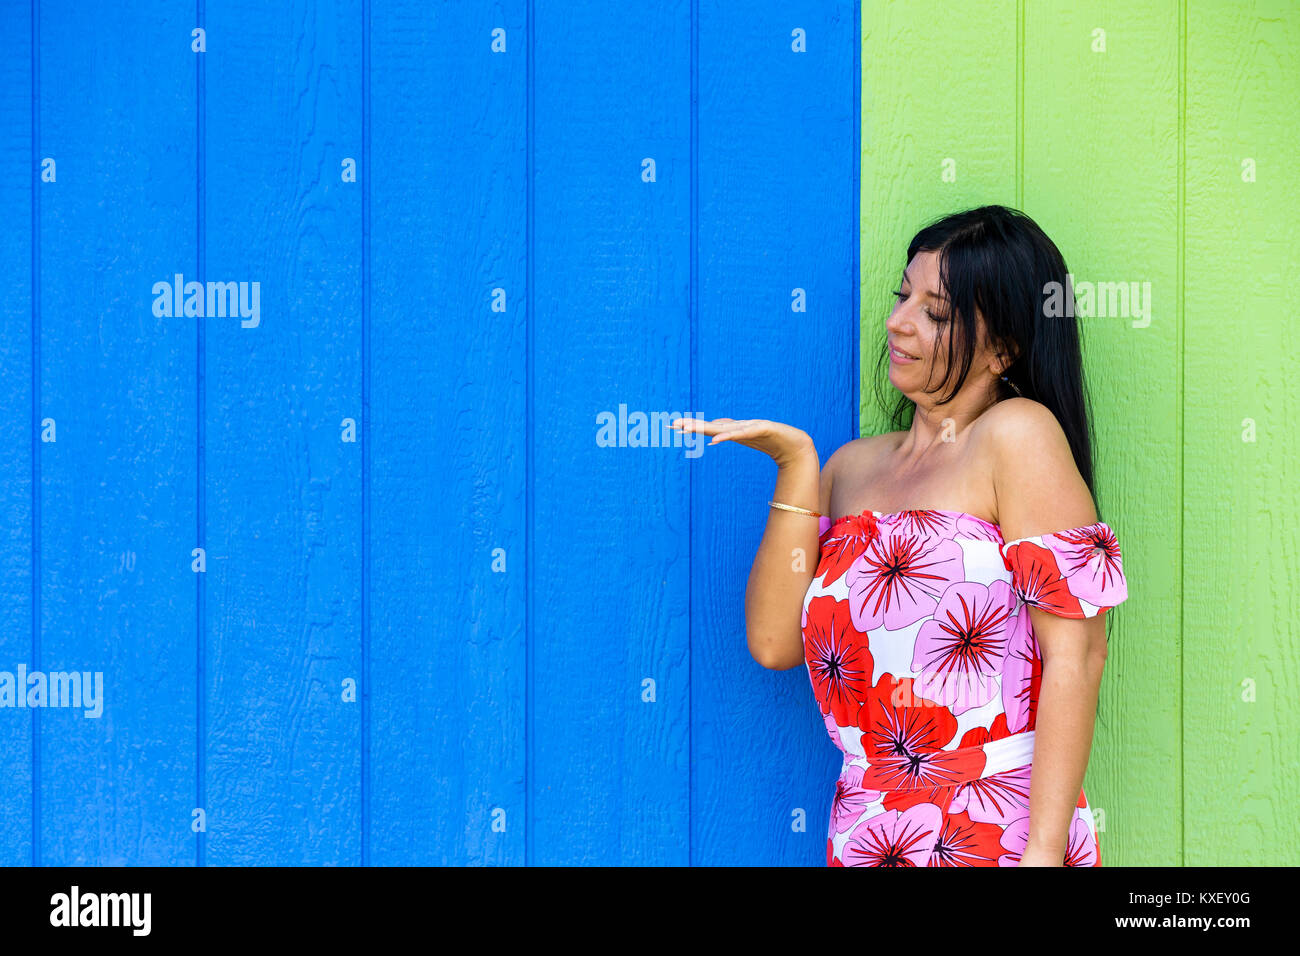 Young woman looking at her empty hand extended for product placement as she stands in a red floral summer dress in front of a blue and green timber wa Stock Photo